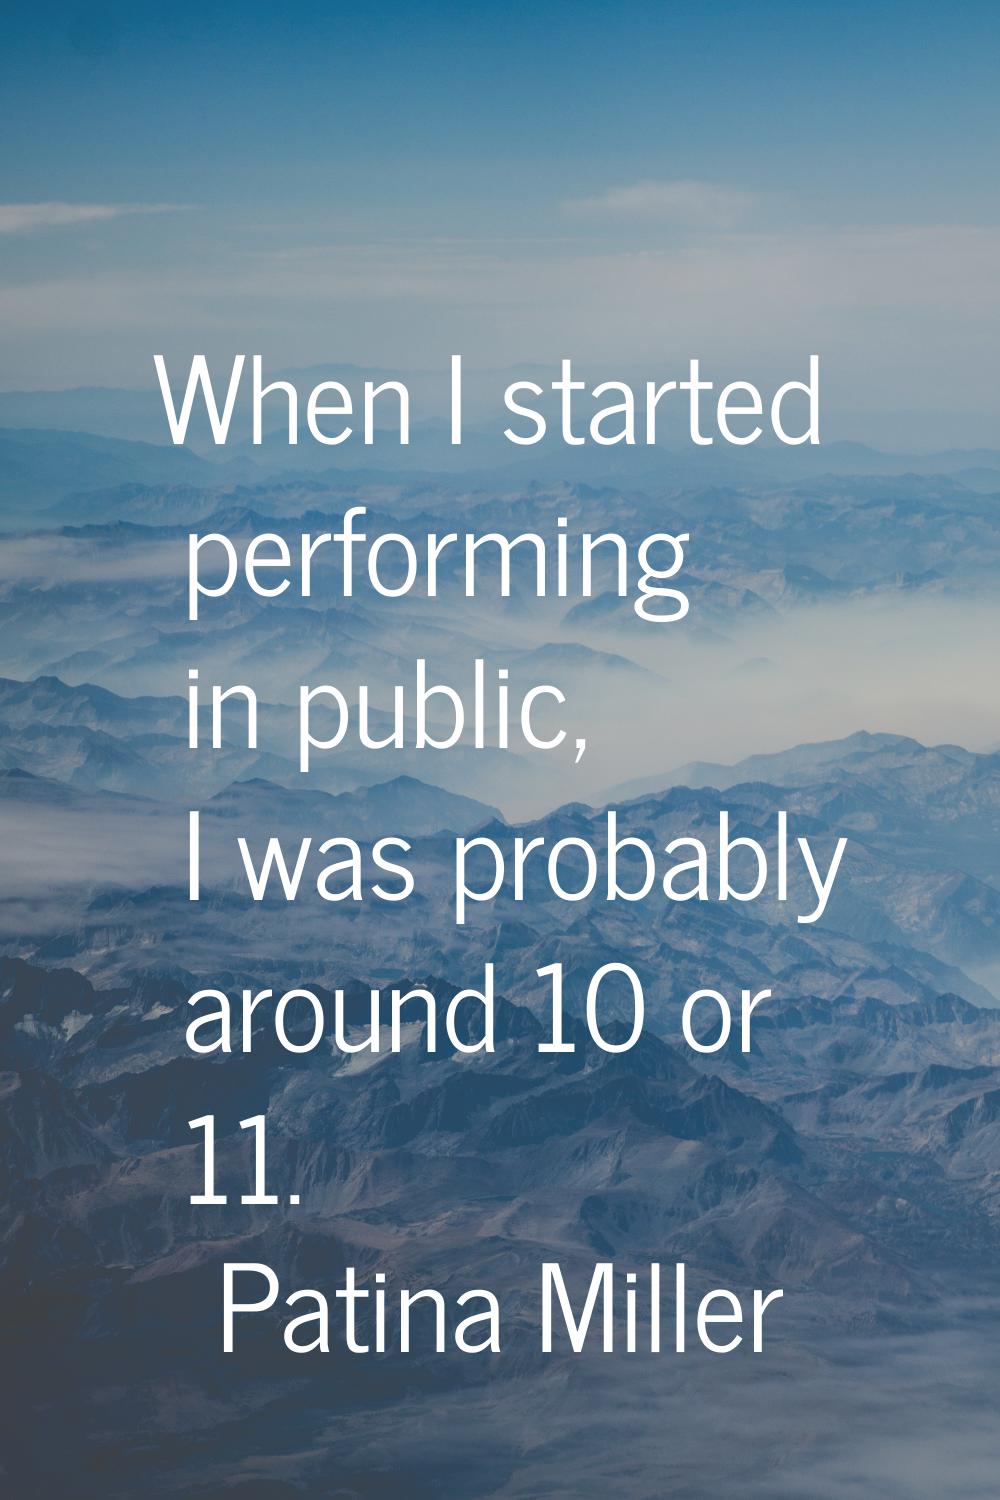 When I started performing in public, I was probably around 10 or 11.